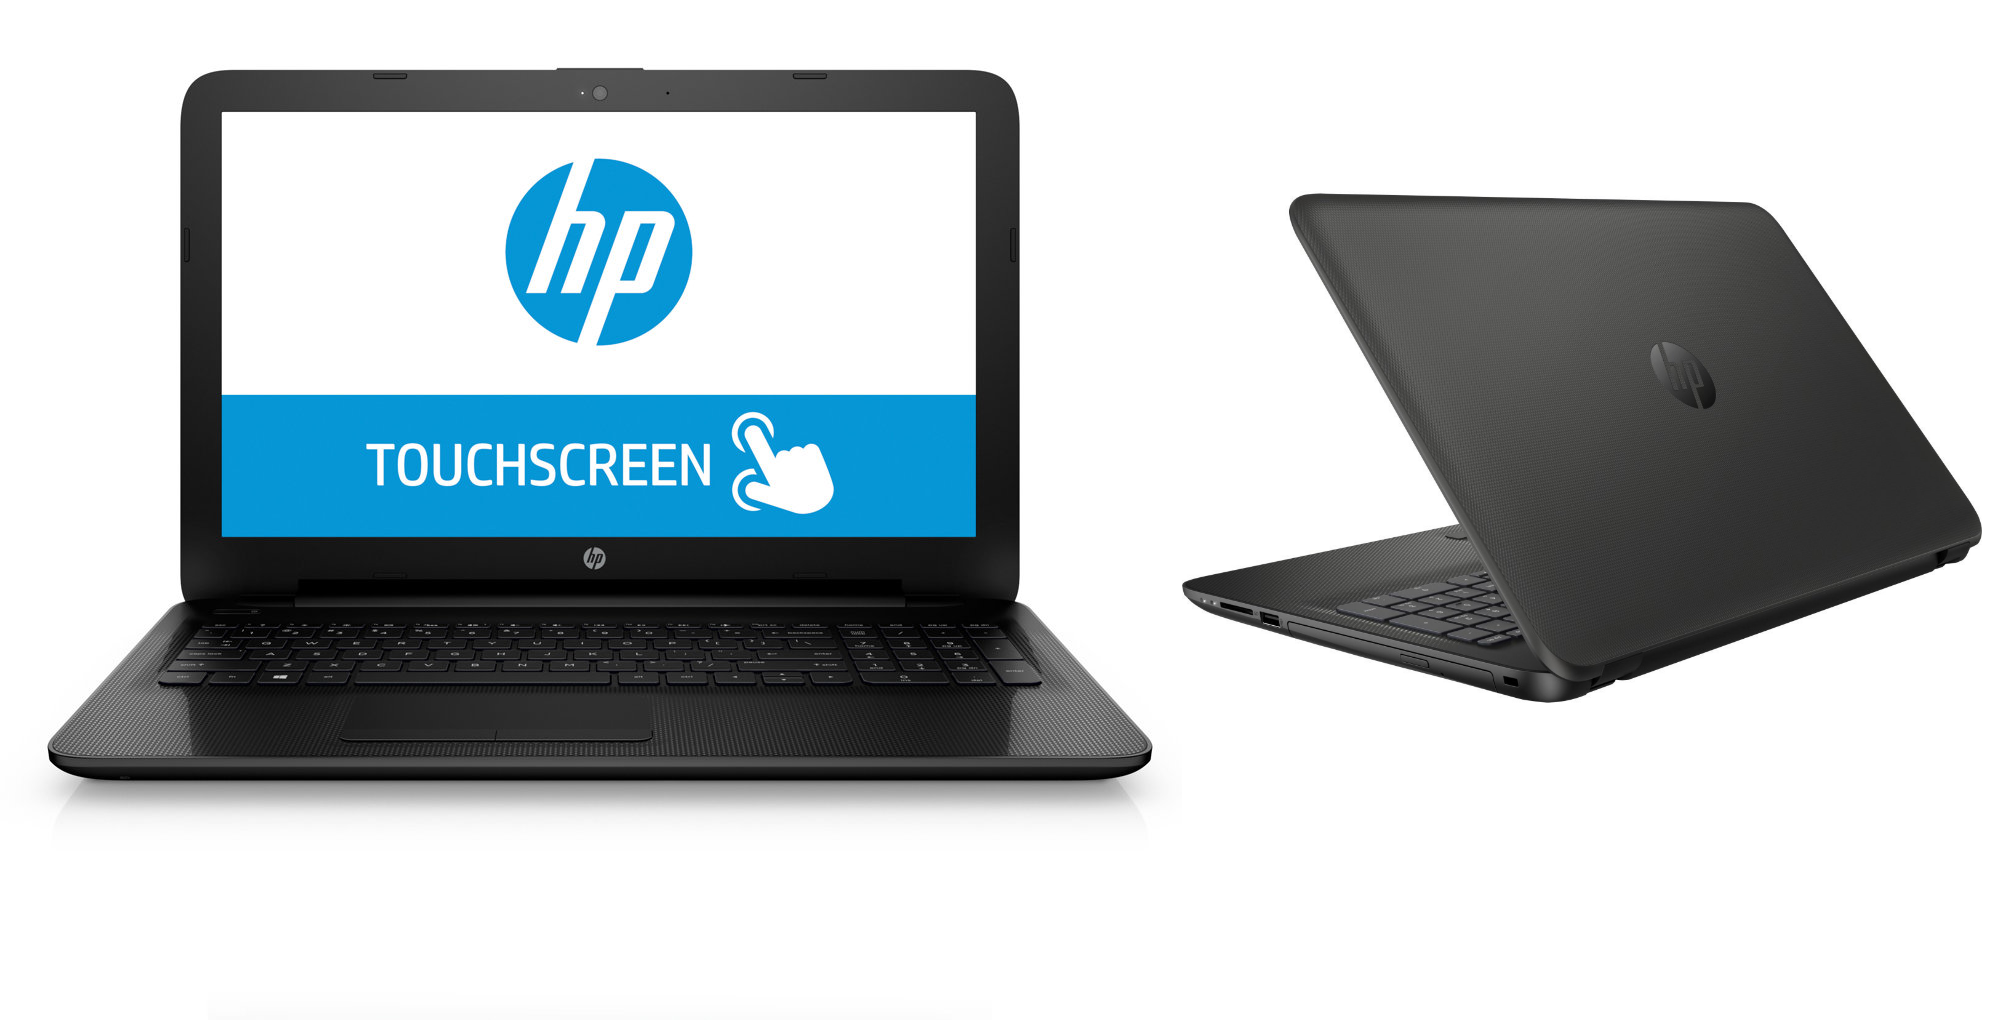 HP 15.6″ Windows 10 Touchscreen Laptop with 6GB RAM and 1TB Hard Drive ONLY $269.99!! (Refurb)